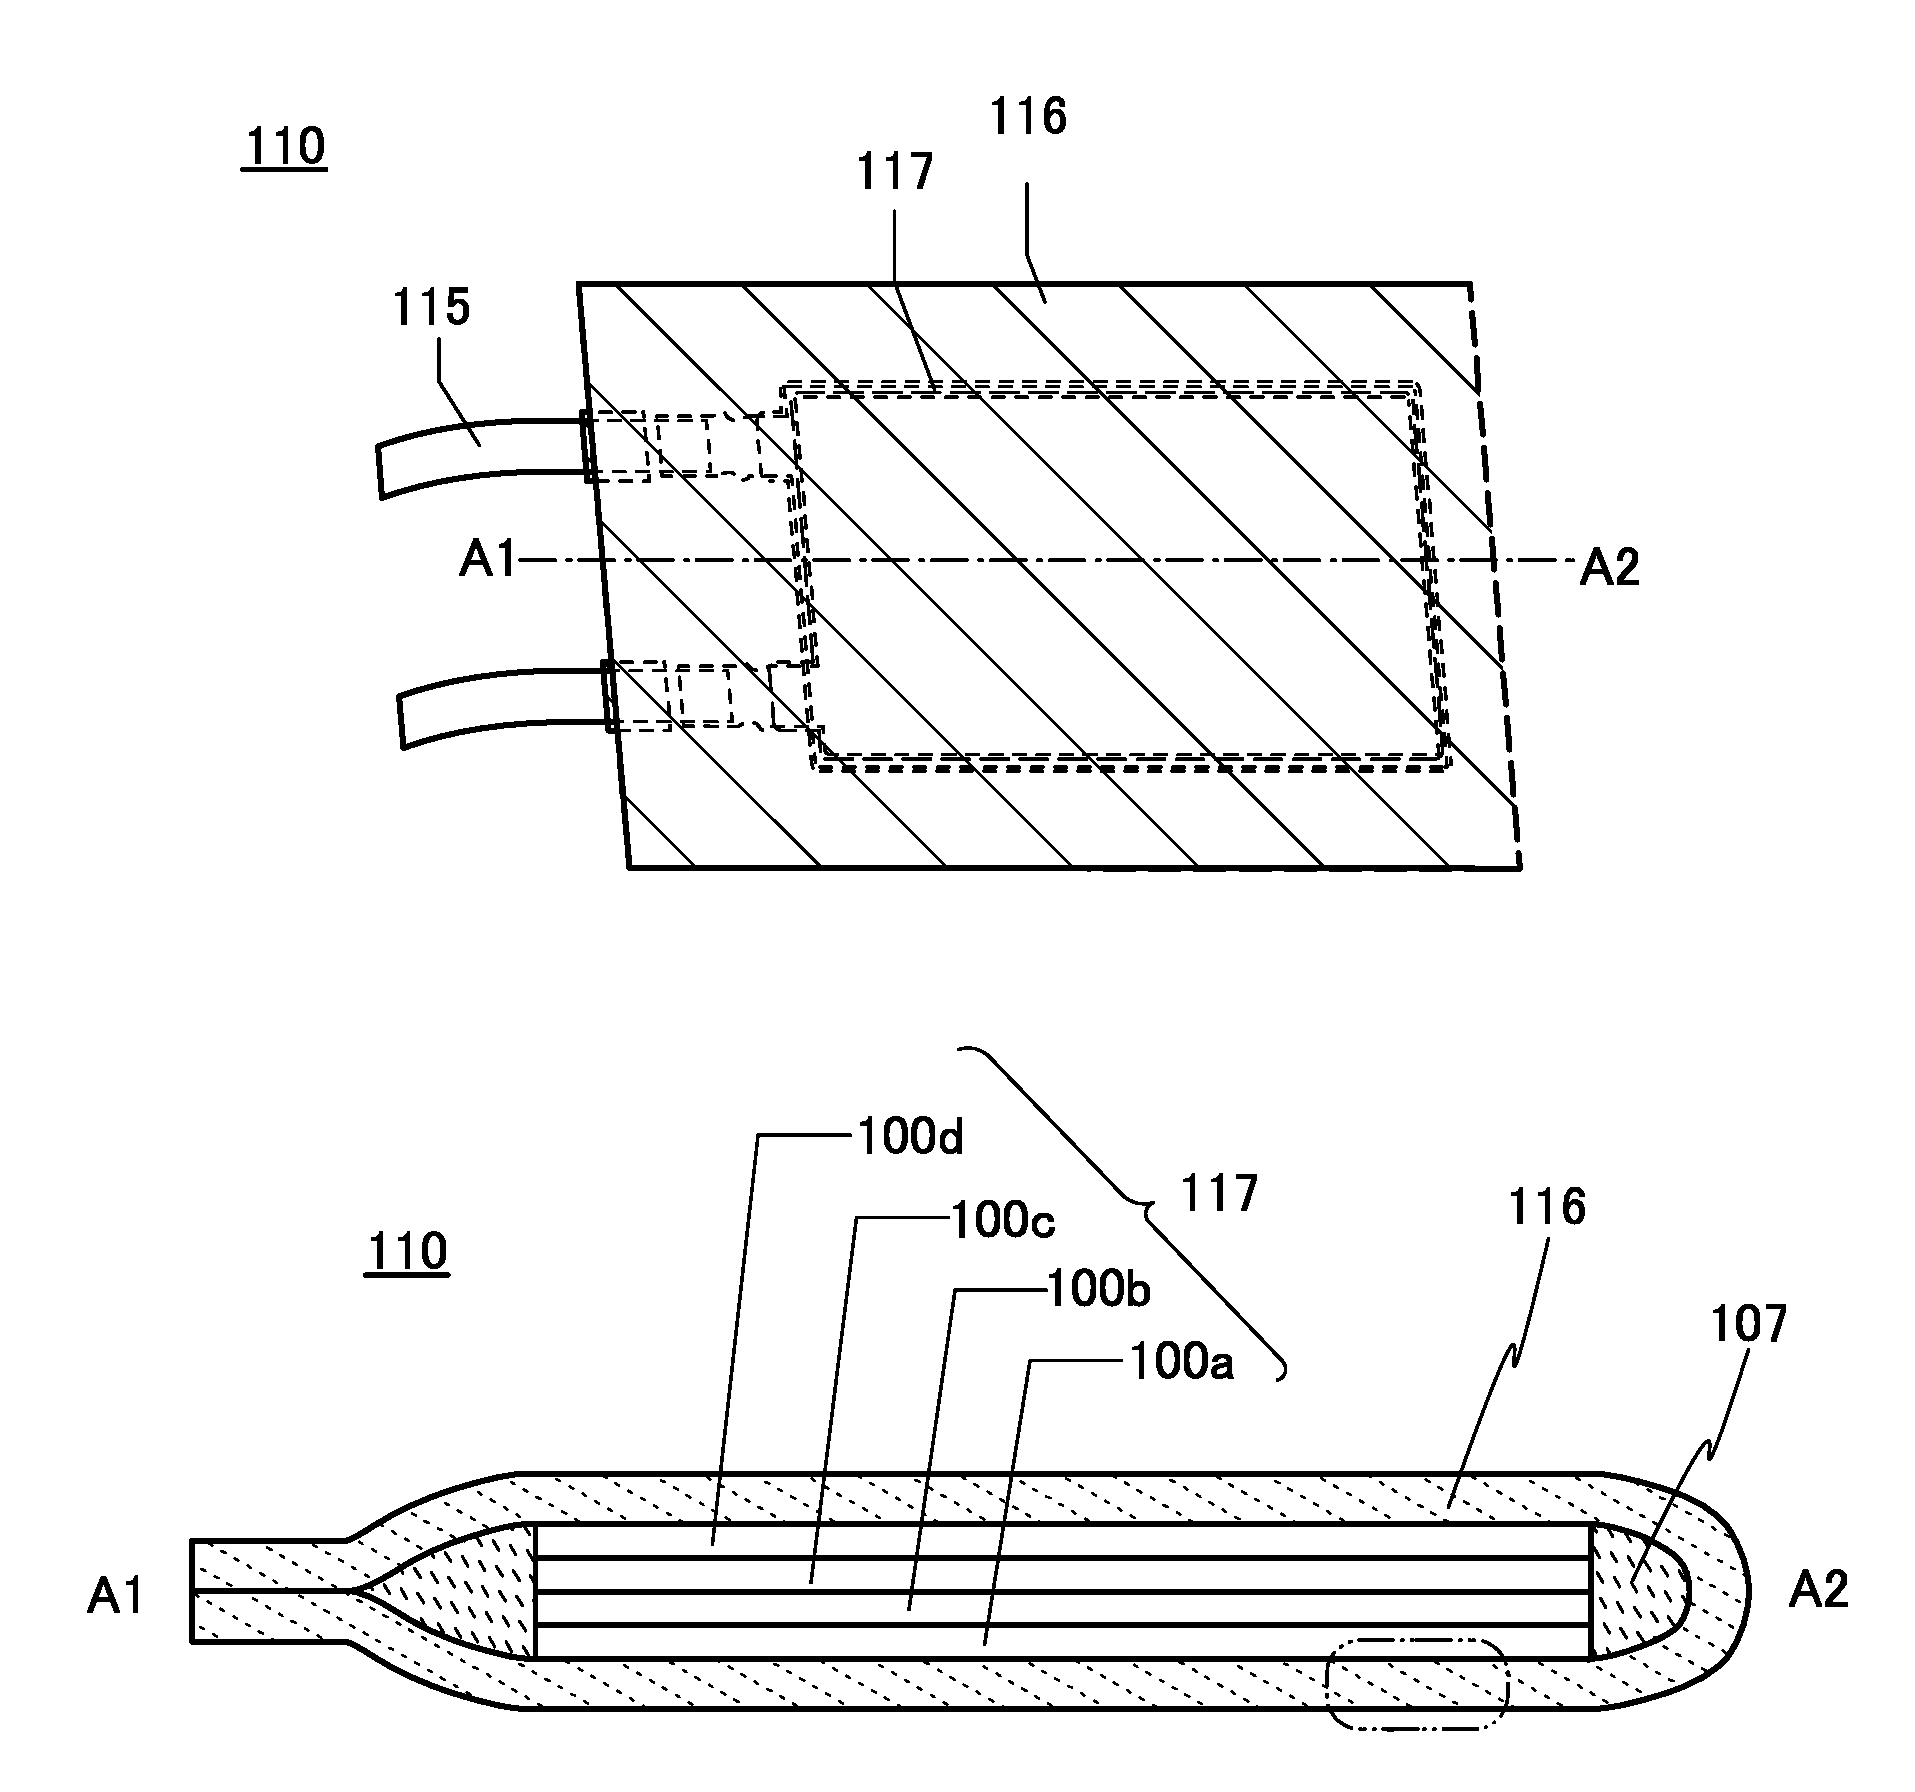 Secondary battery and electronic device